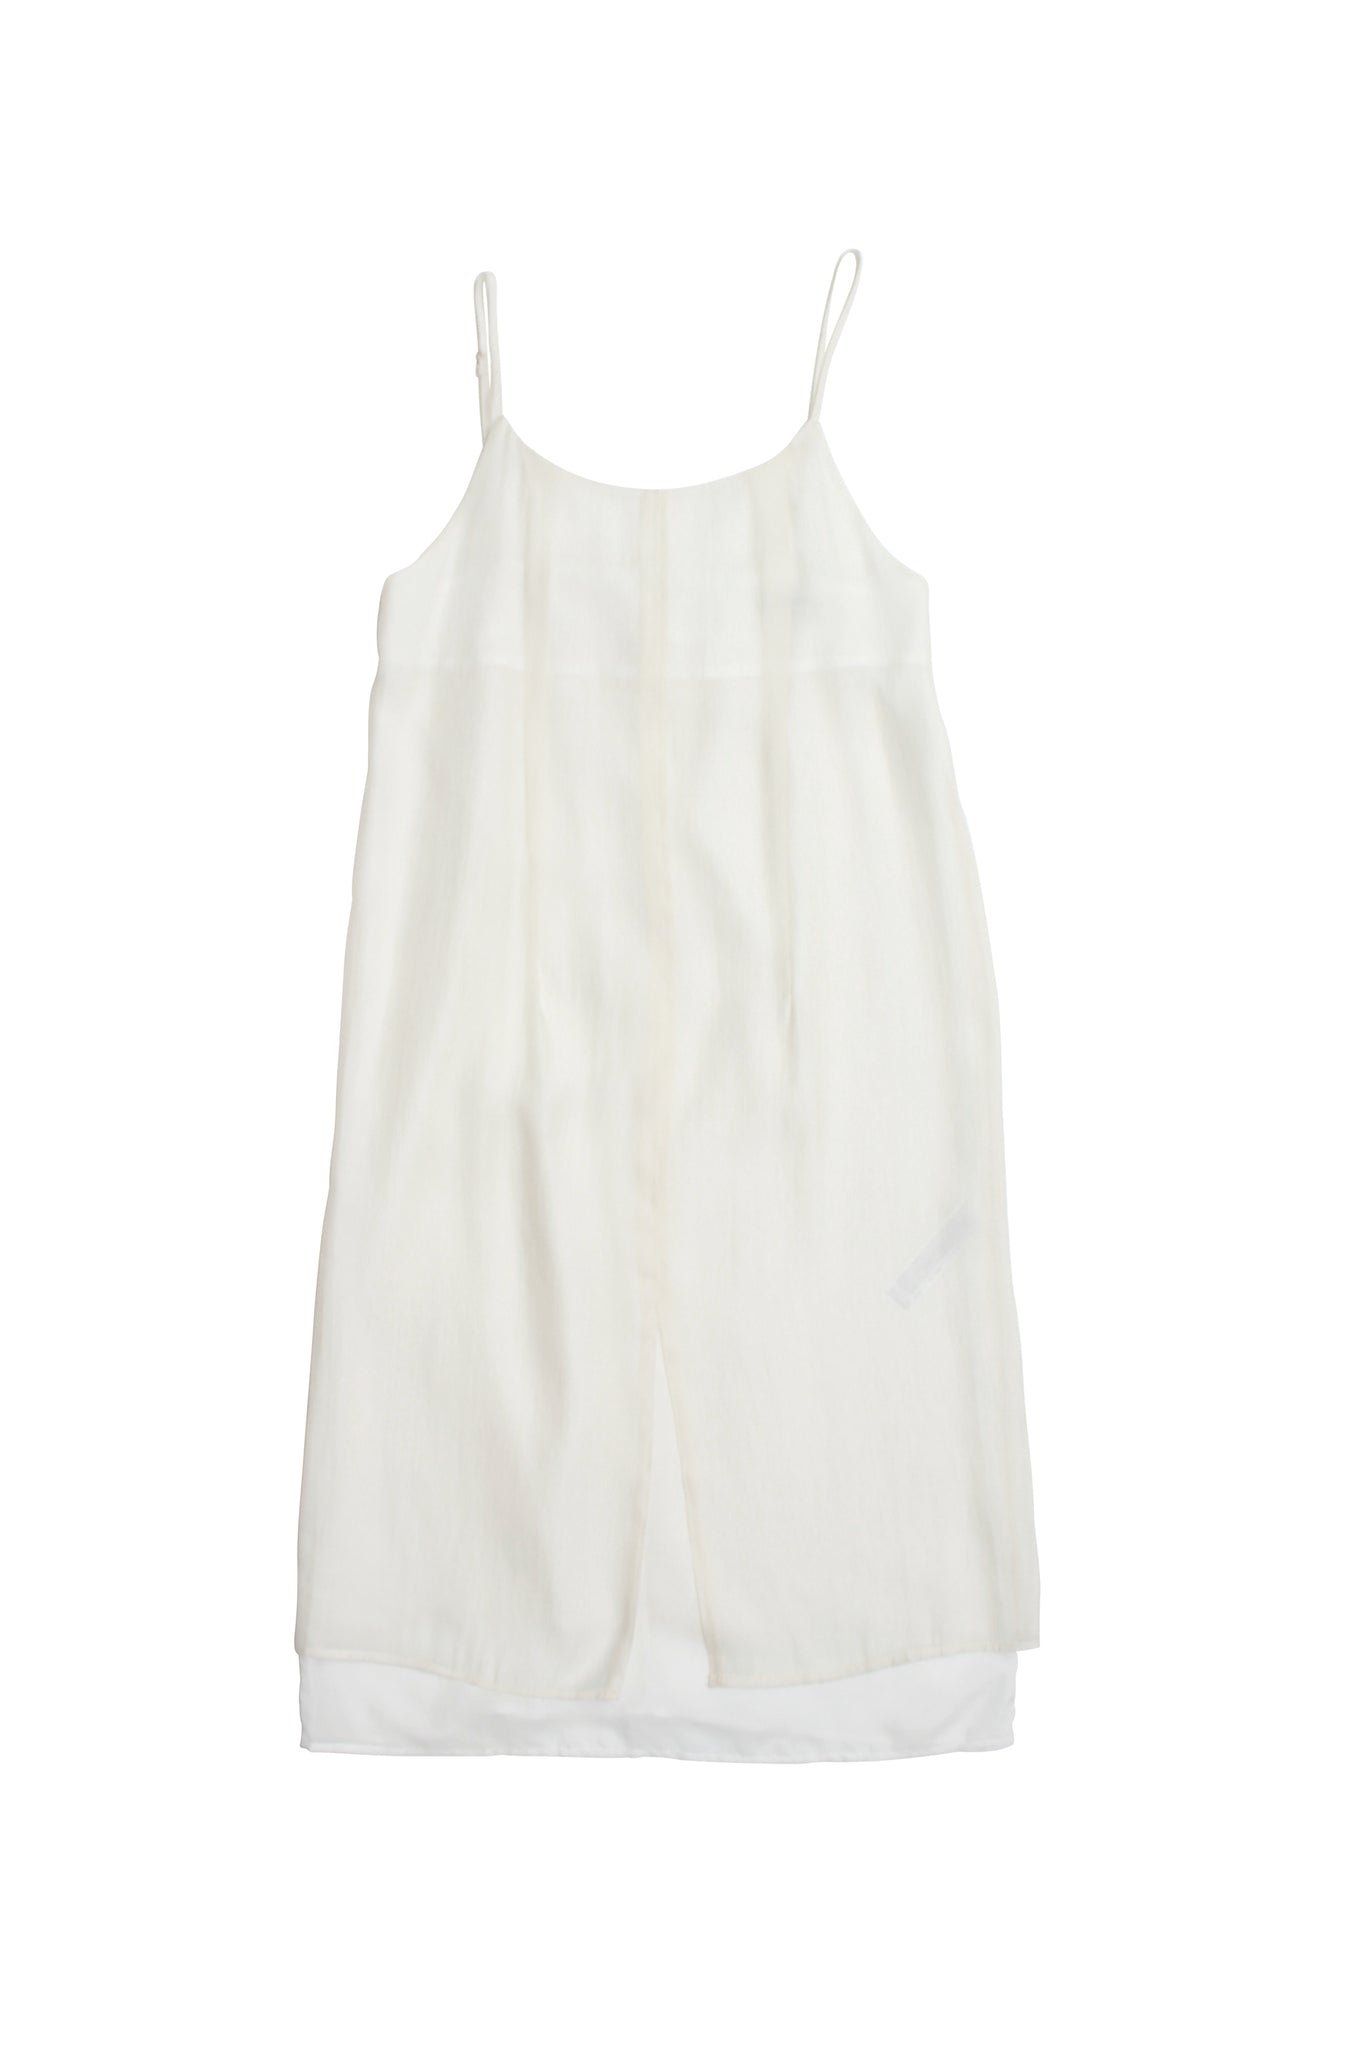 Silhouette Layered Dress in white